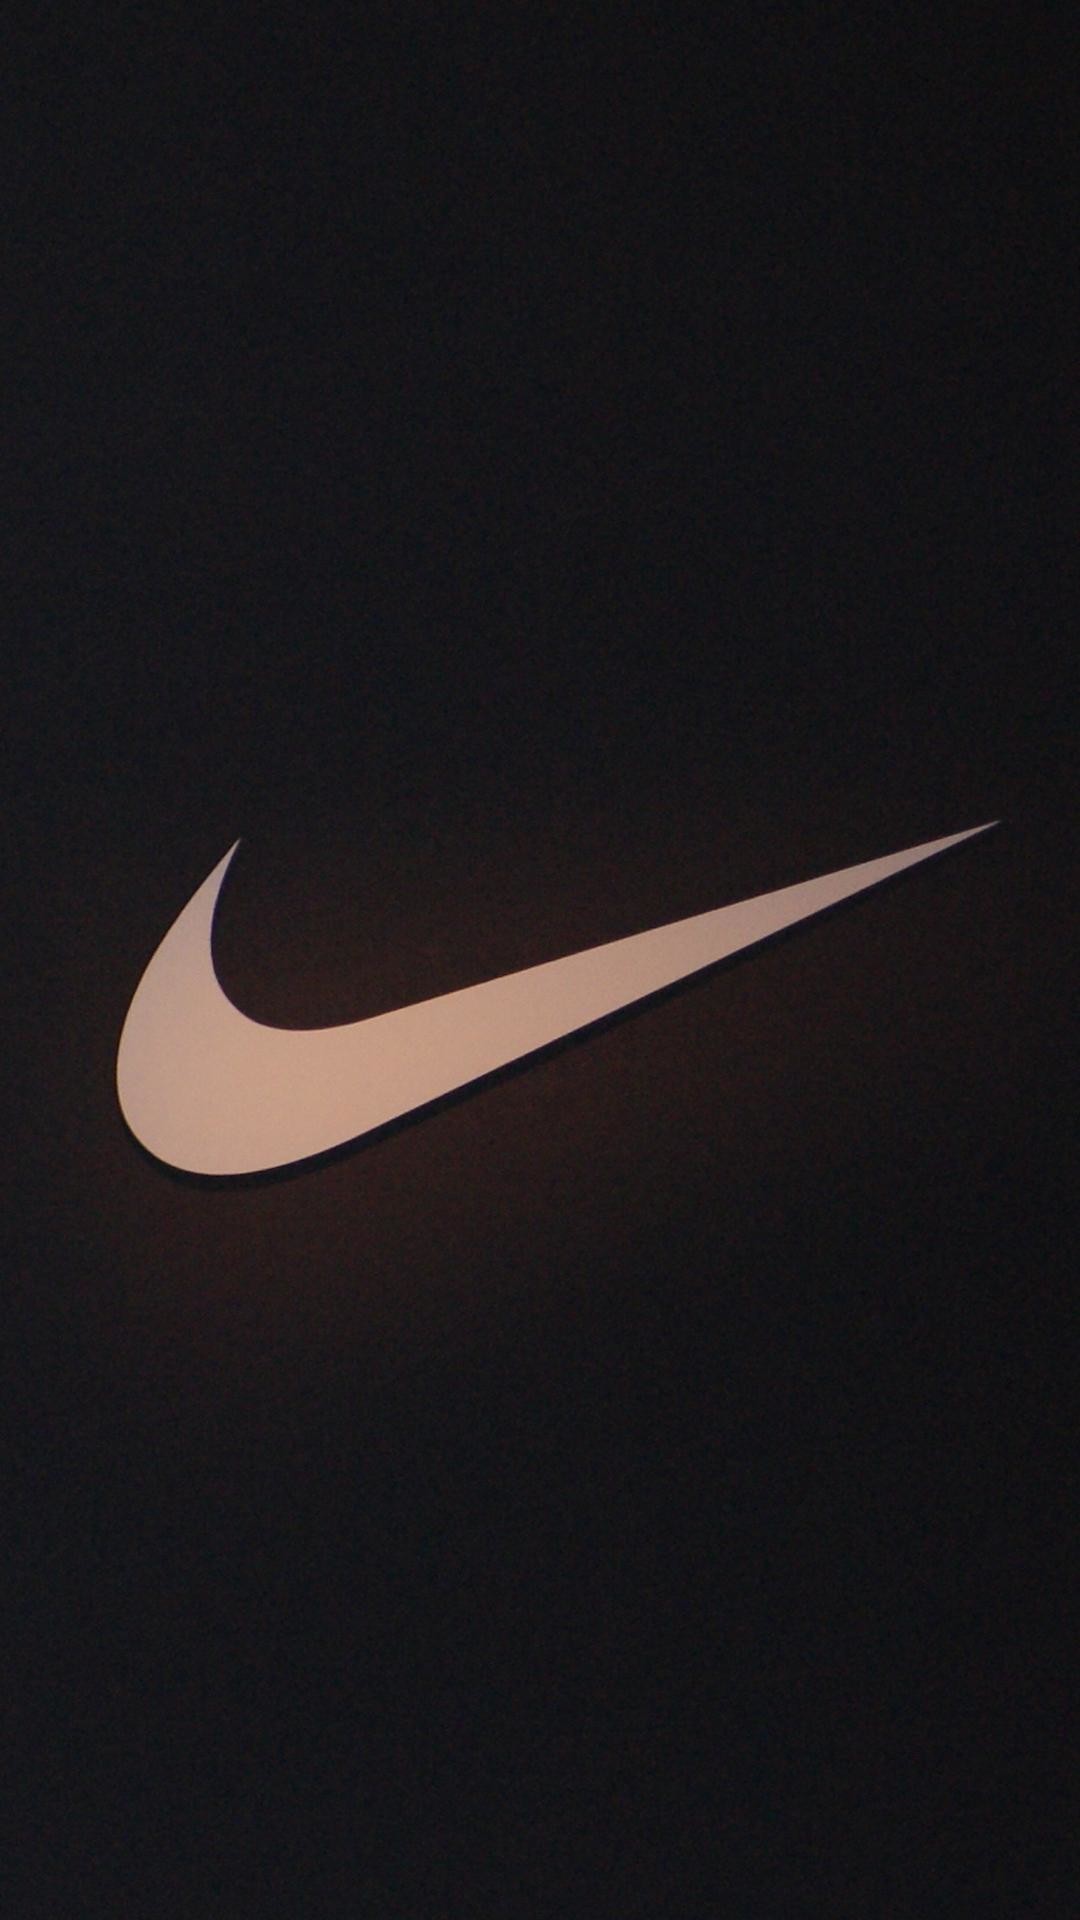 1080x1920 wallpaper.wiki-Nike-Image-HD-for-Iphone-PIC-